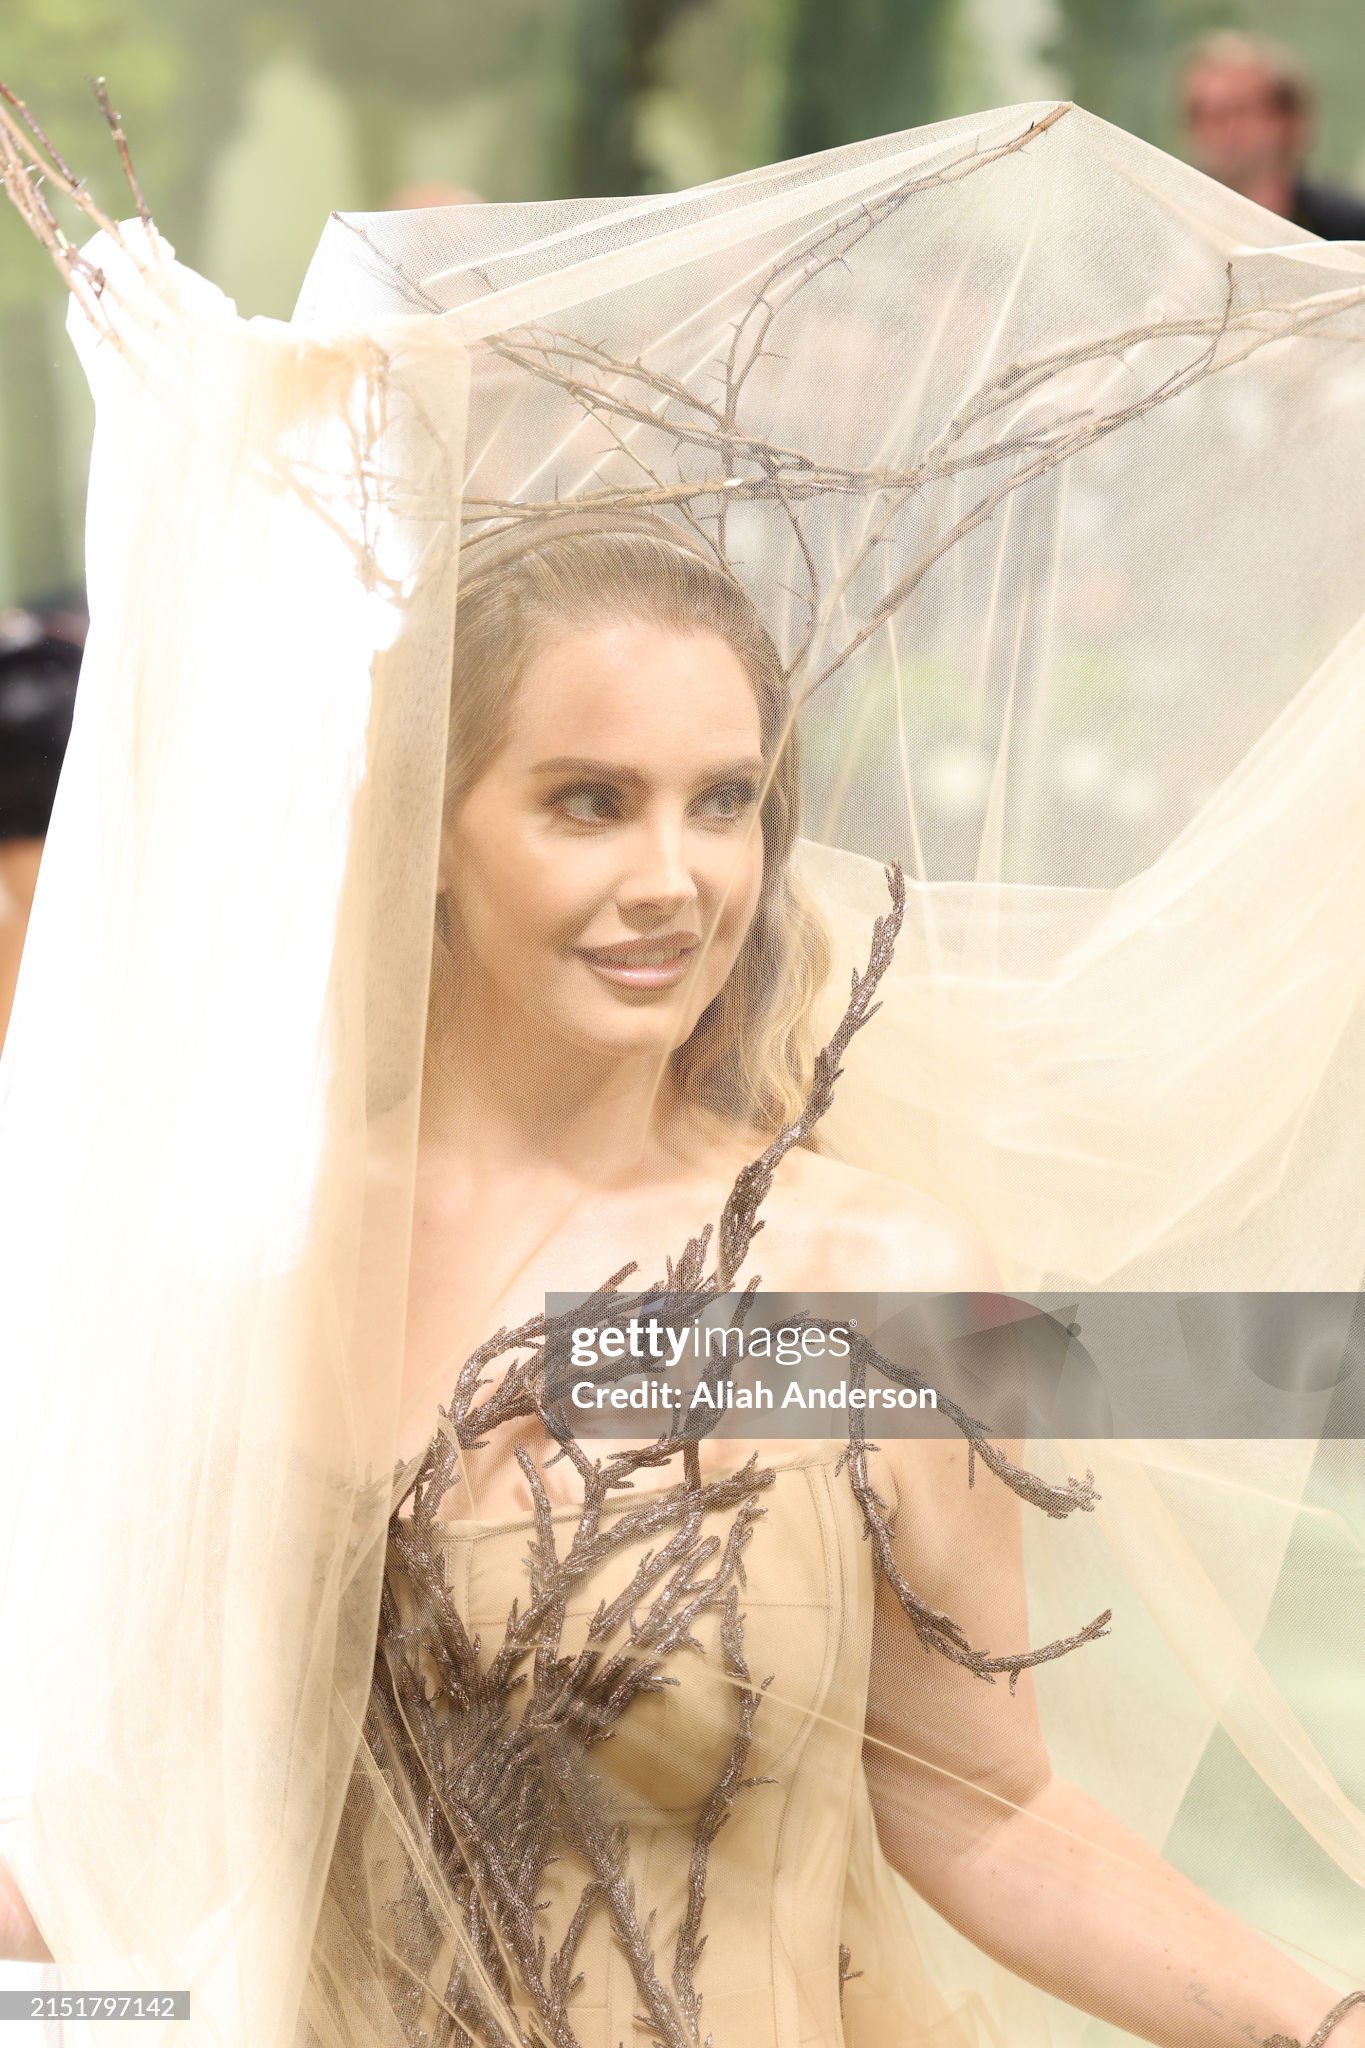 gettyimages-2151797142-2048x2048.jpg